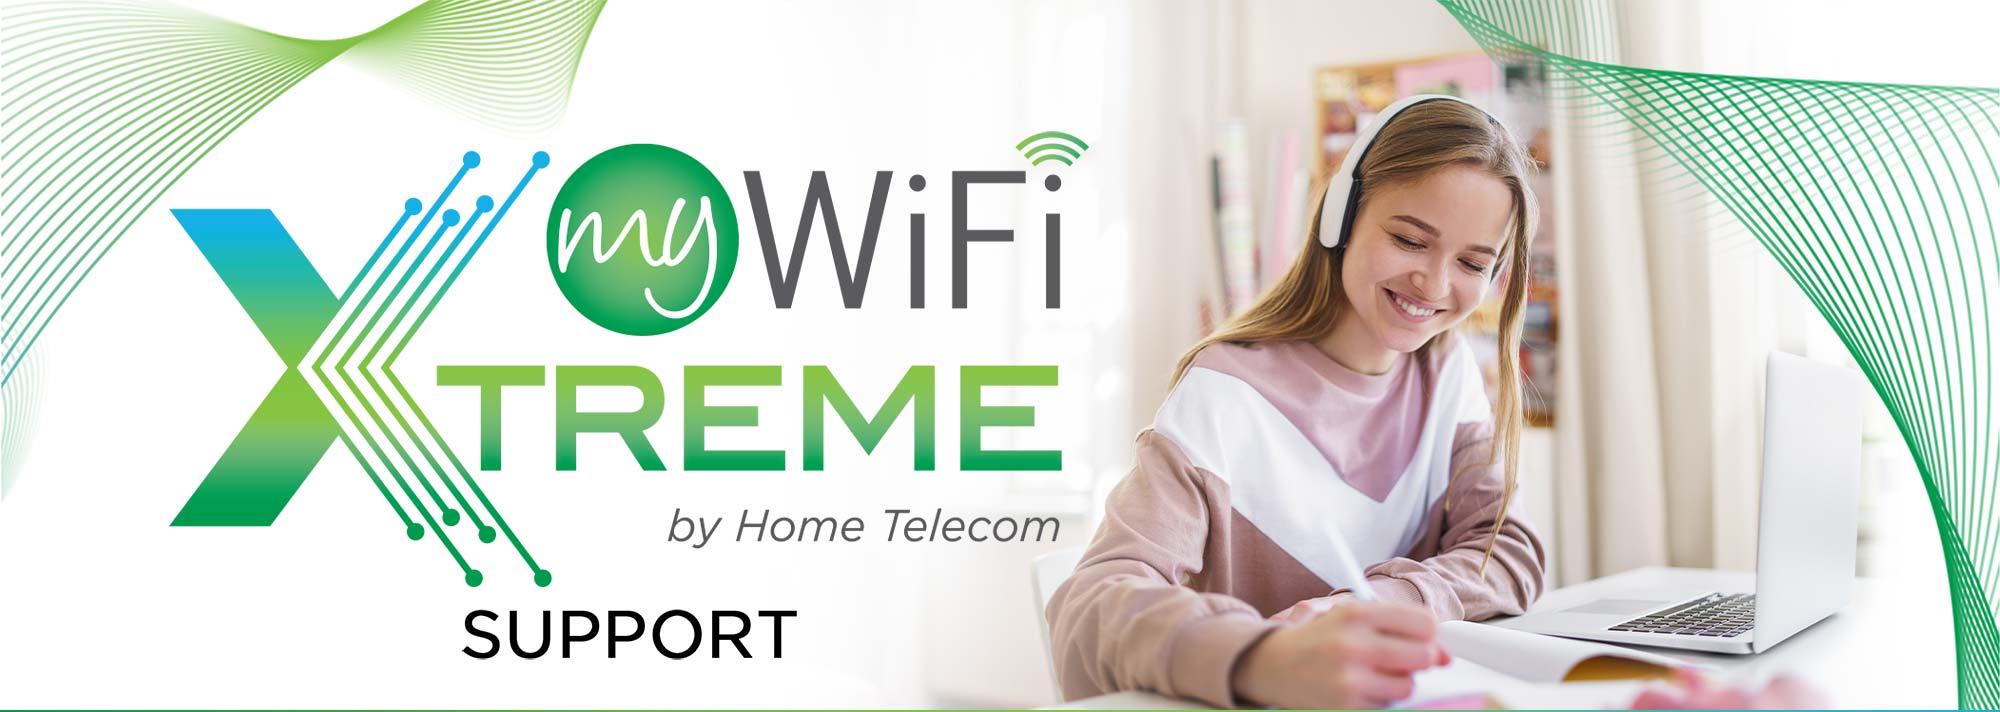 myWiFi Xtreme Support